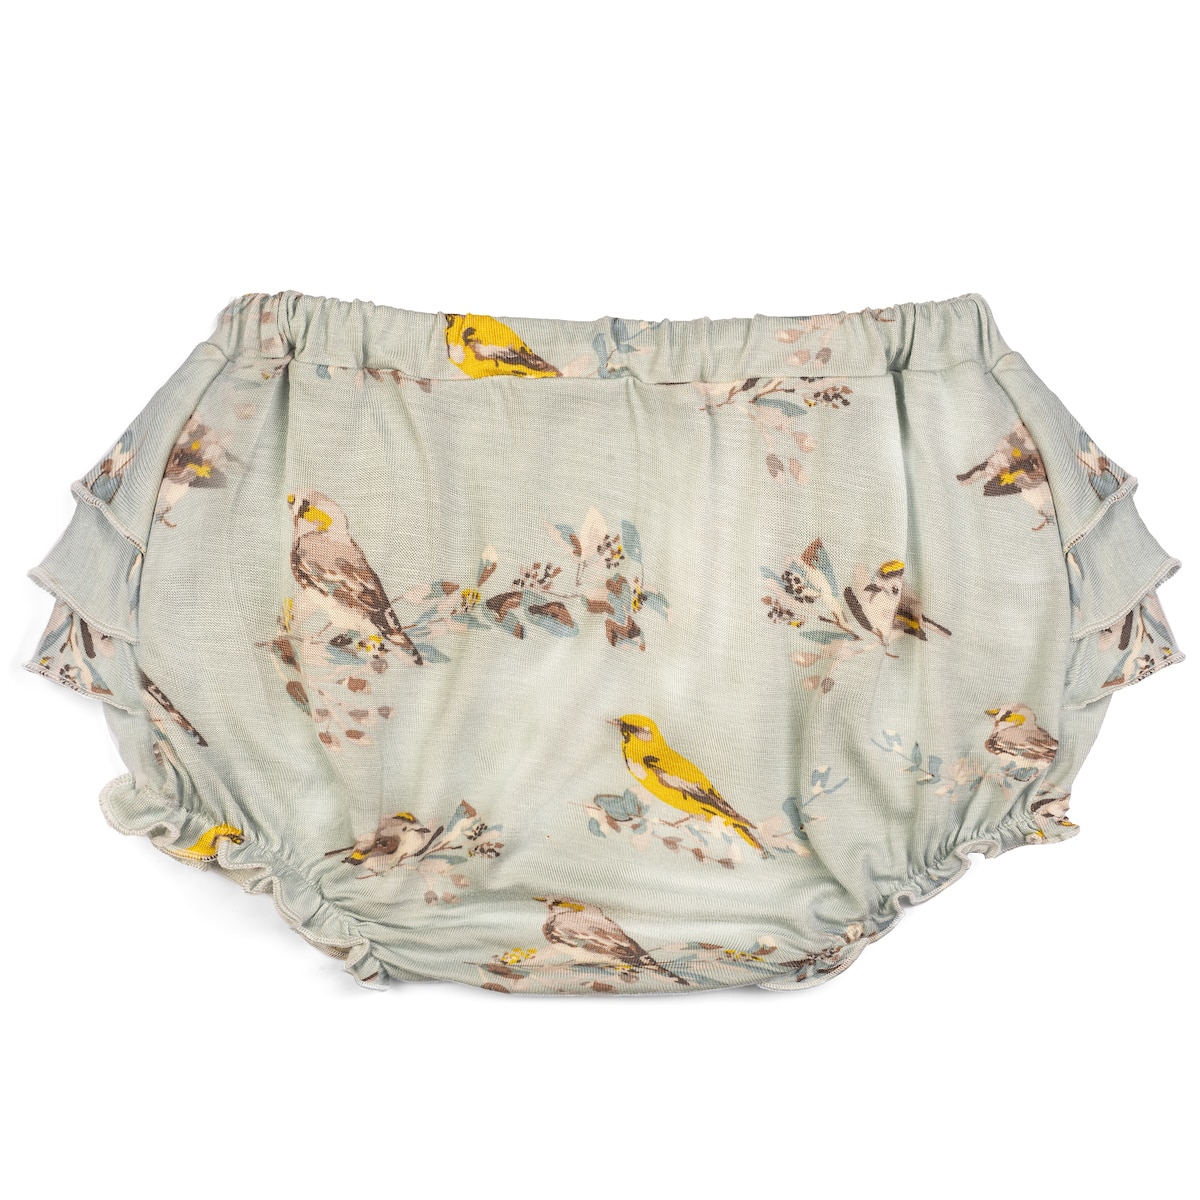 Somos - Forget Me Not - Blue bloomer shorts in organic cotton - Molo